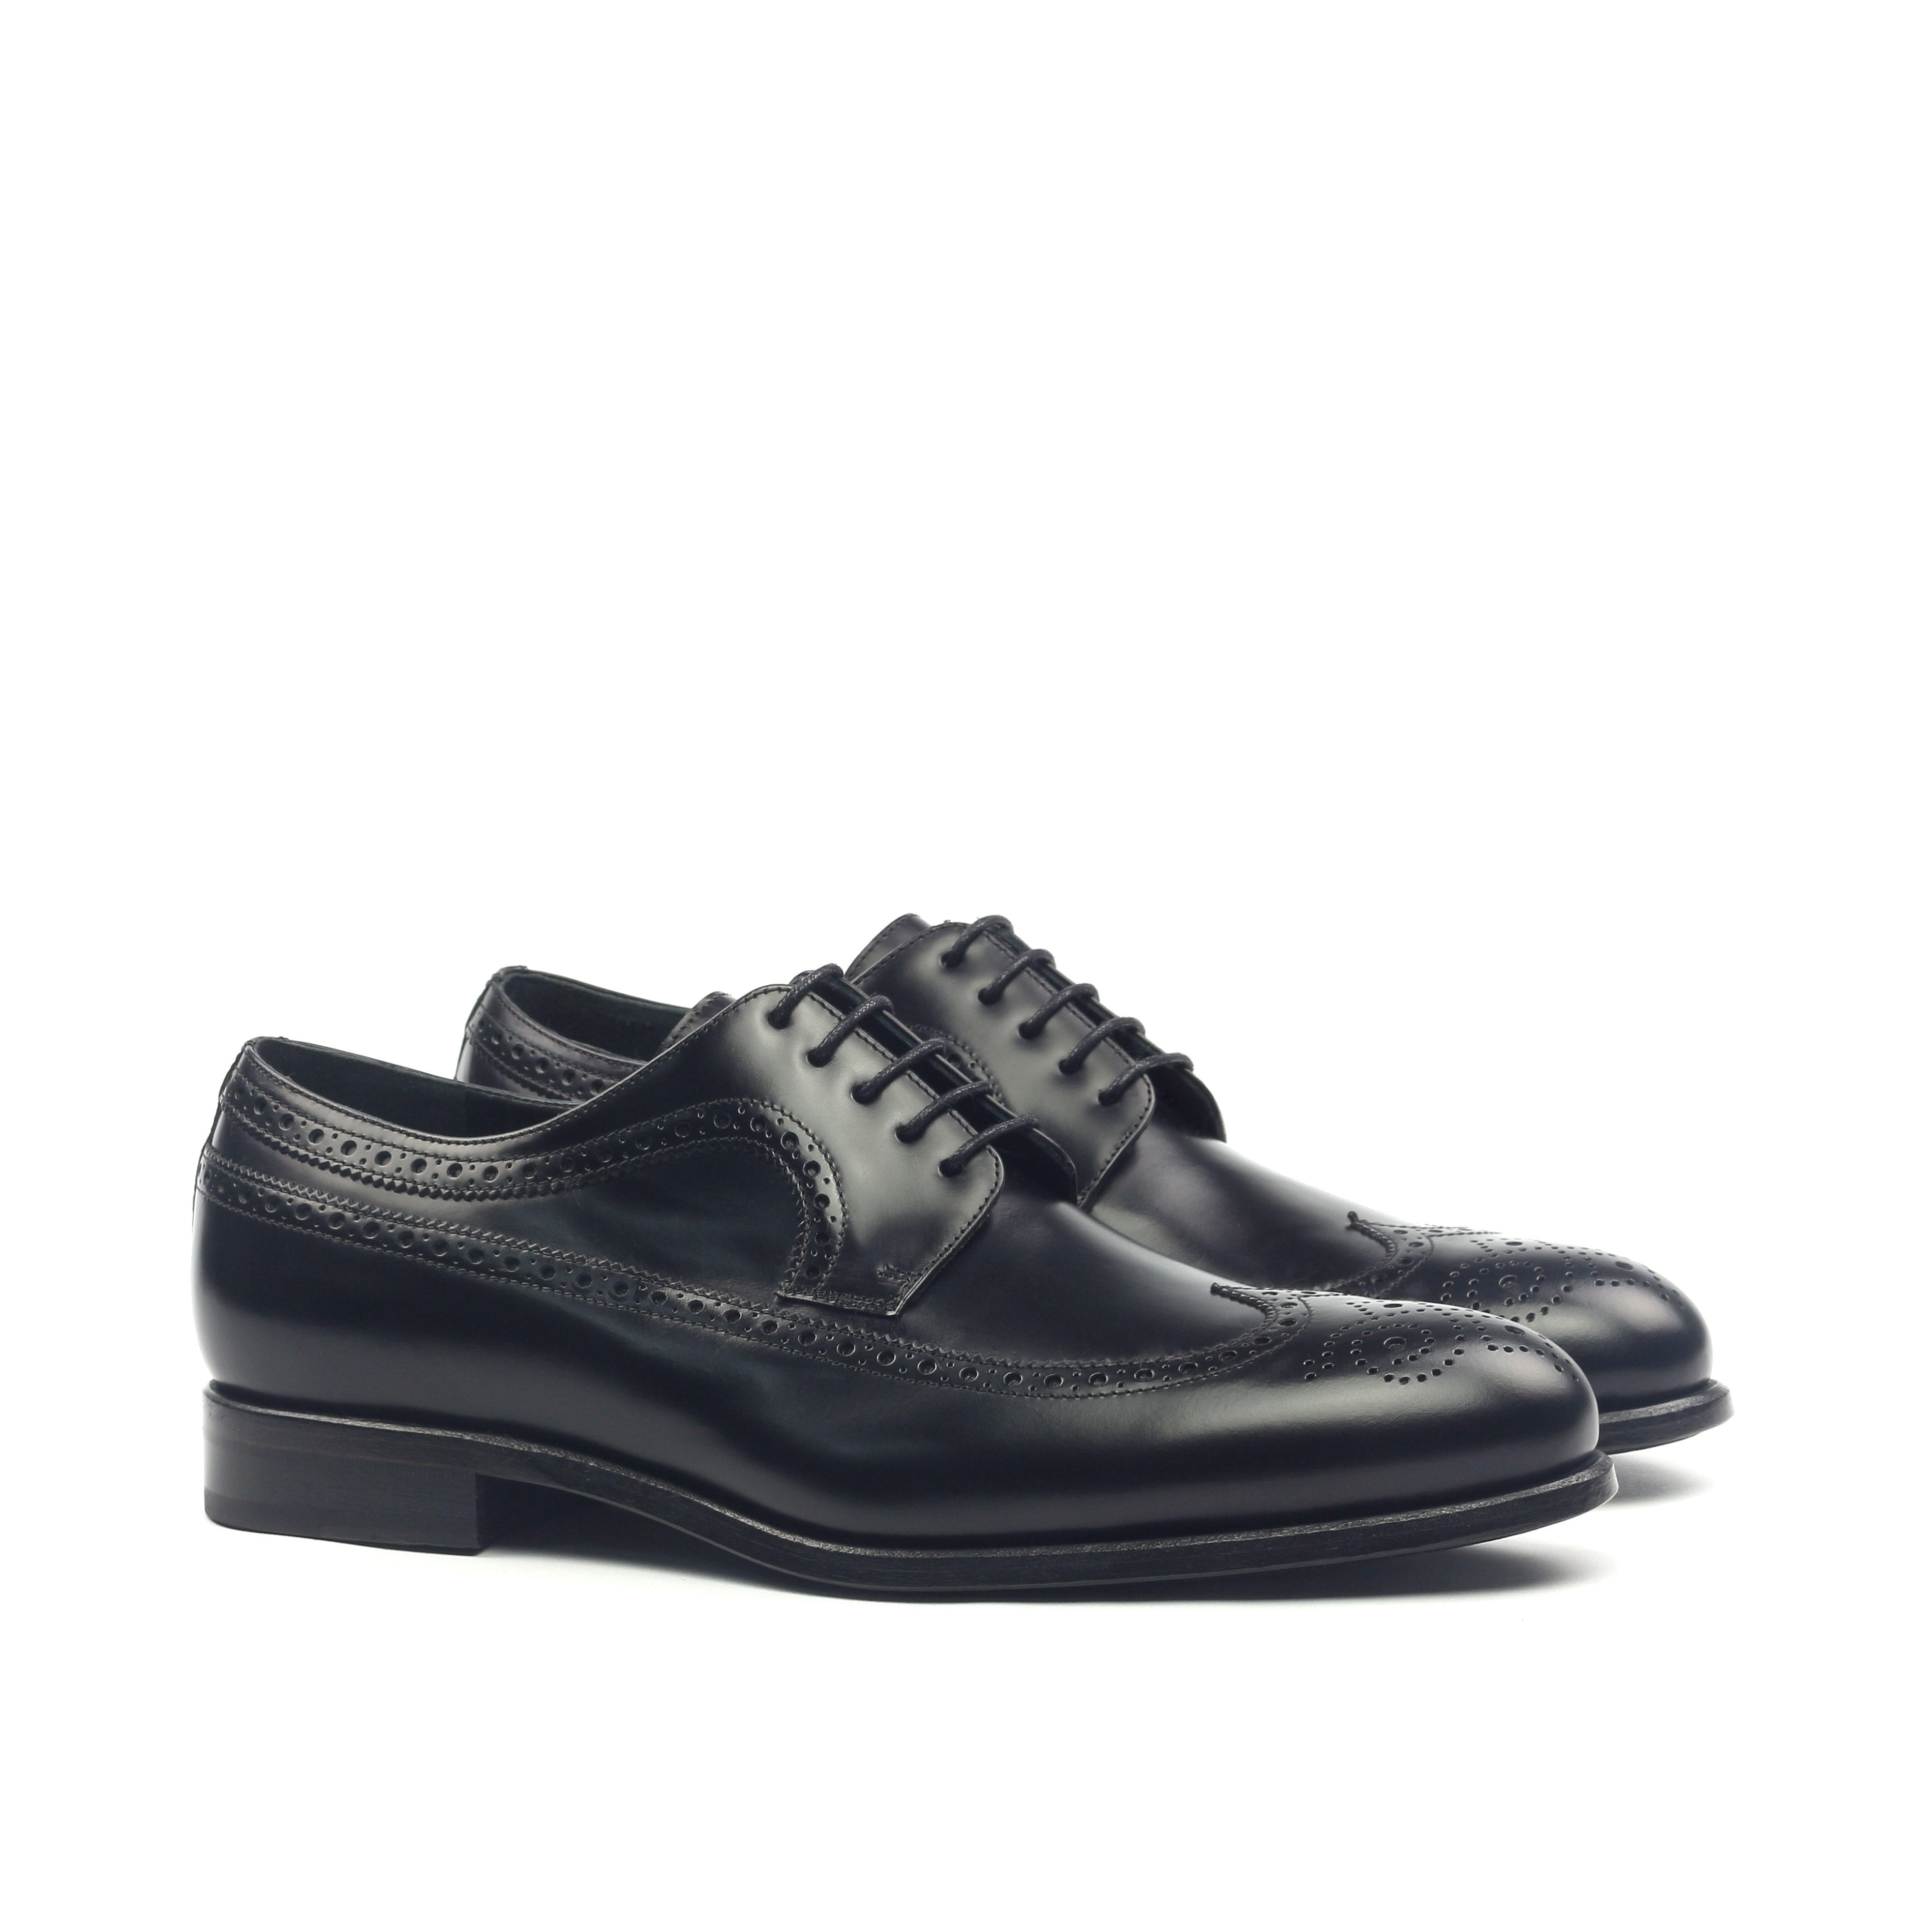 'The Blucher' Black Polished Calfskin Shoe Mens Luxury Front Side View